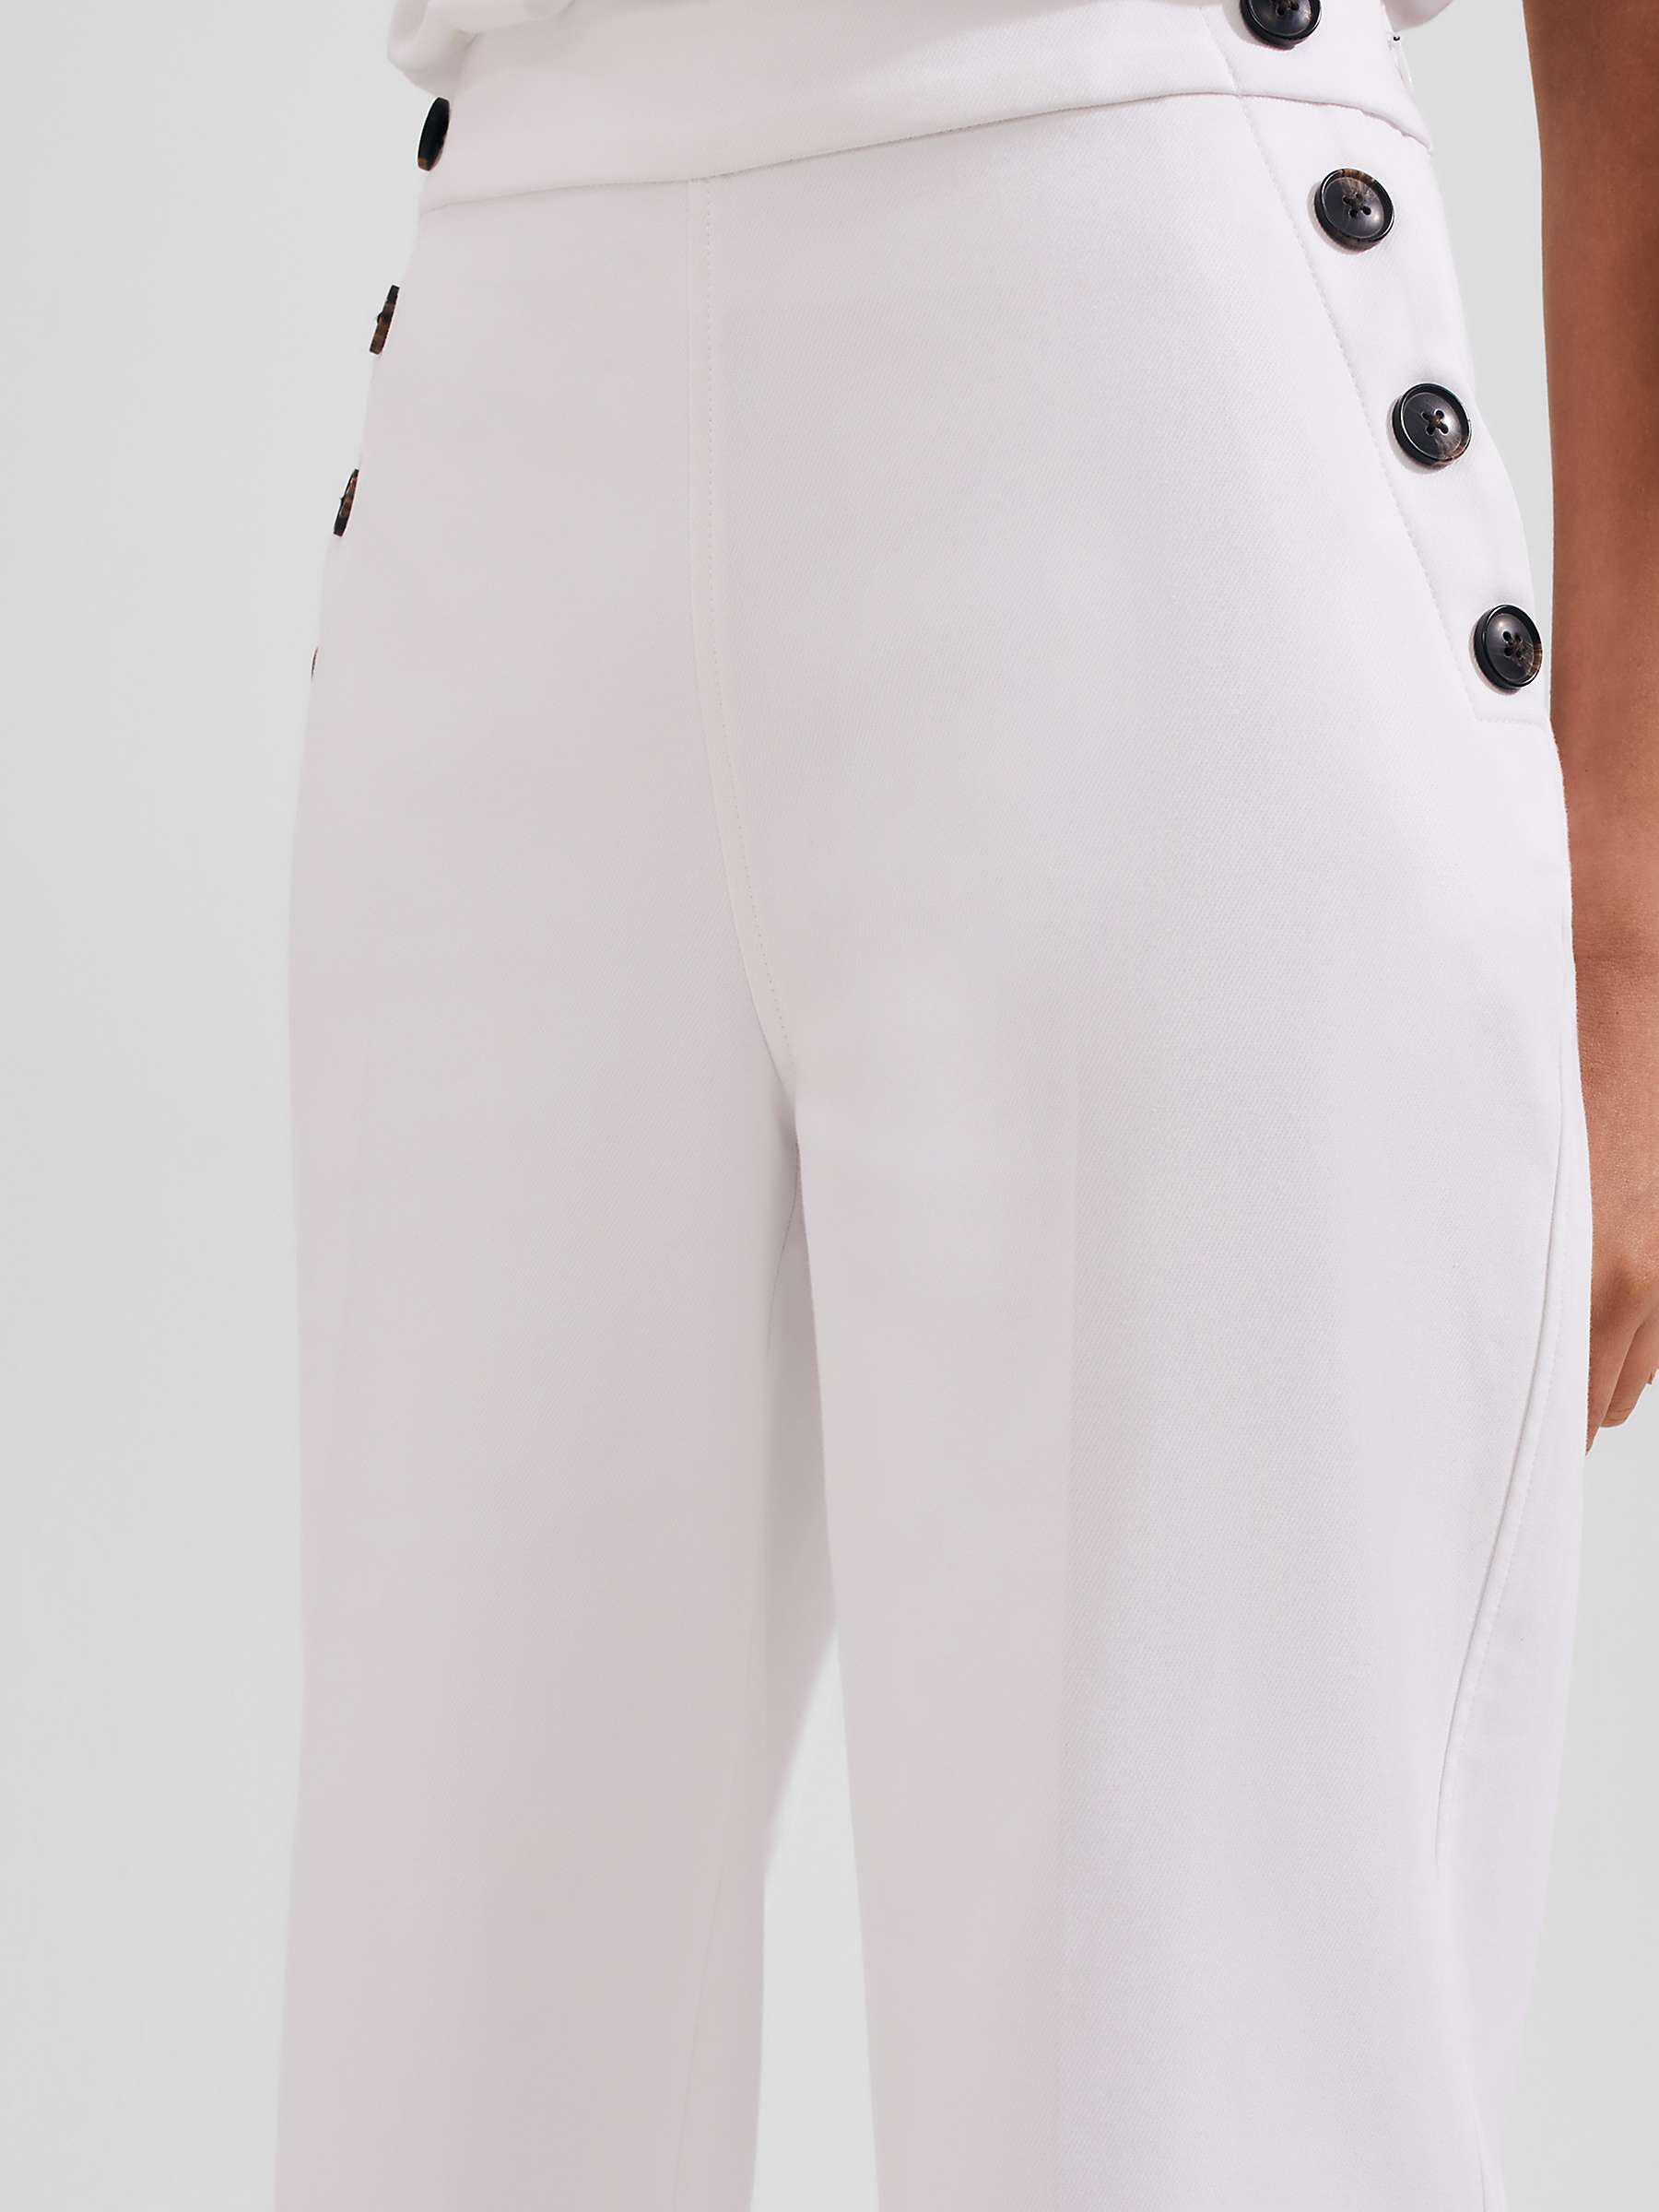 Buy Hobbs Petite Simone Button Detail Trousers, White Online at johnlewis.com